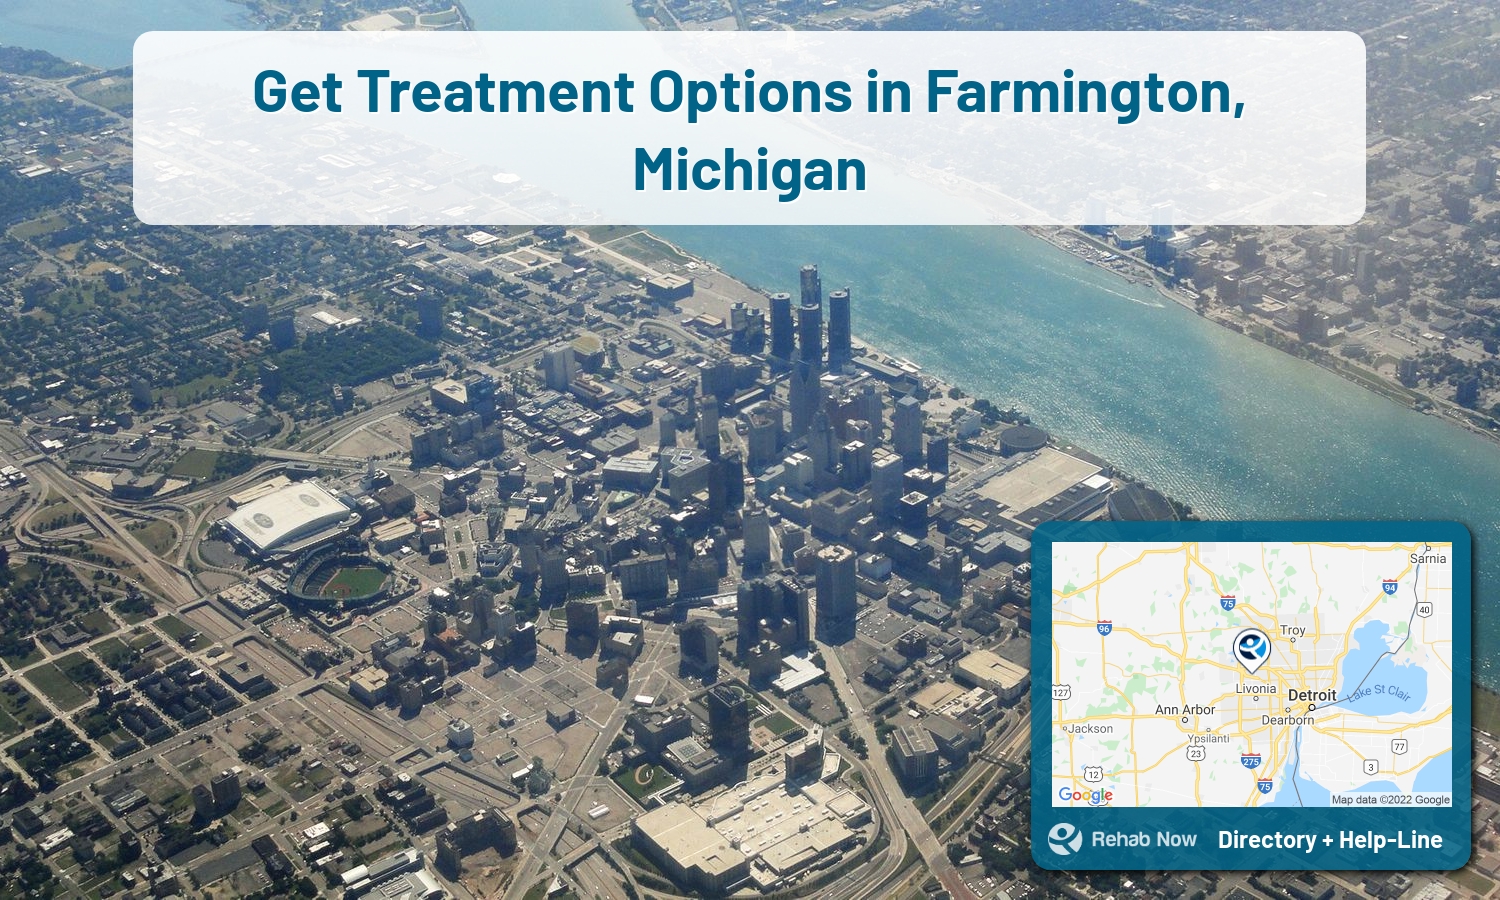 Our experts can help you find treatment now in Farmington, Michigan. We list drug rehab and alcohol centers in Michigan.